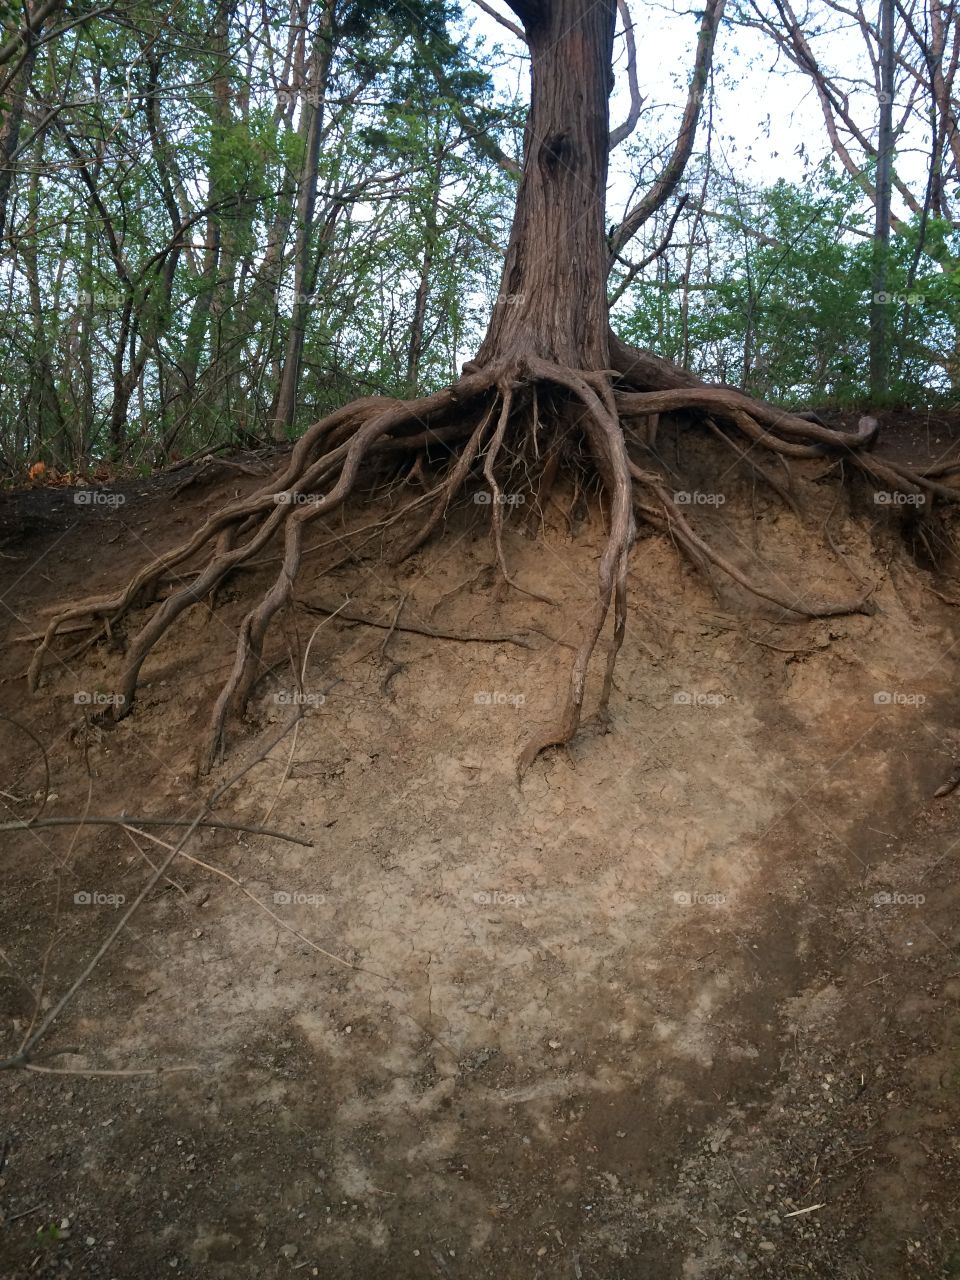 Roots. Tree roots coming out of the ground